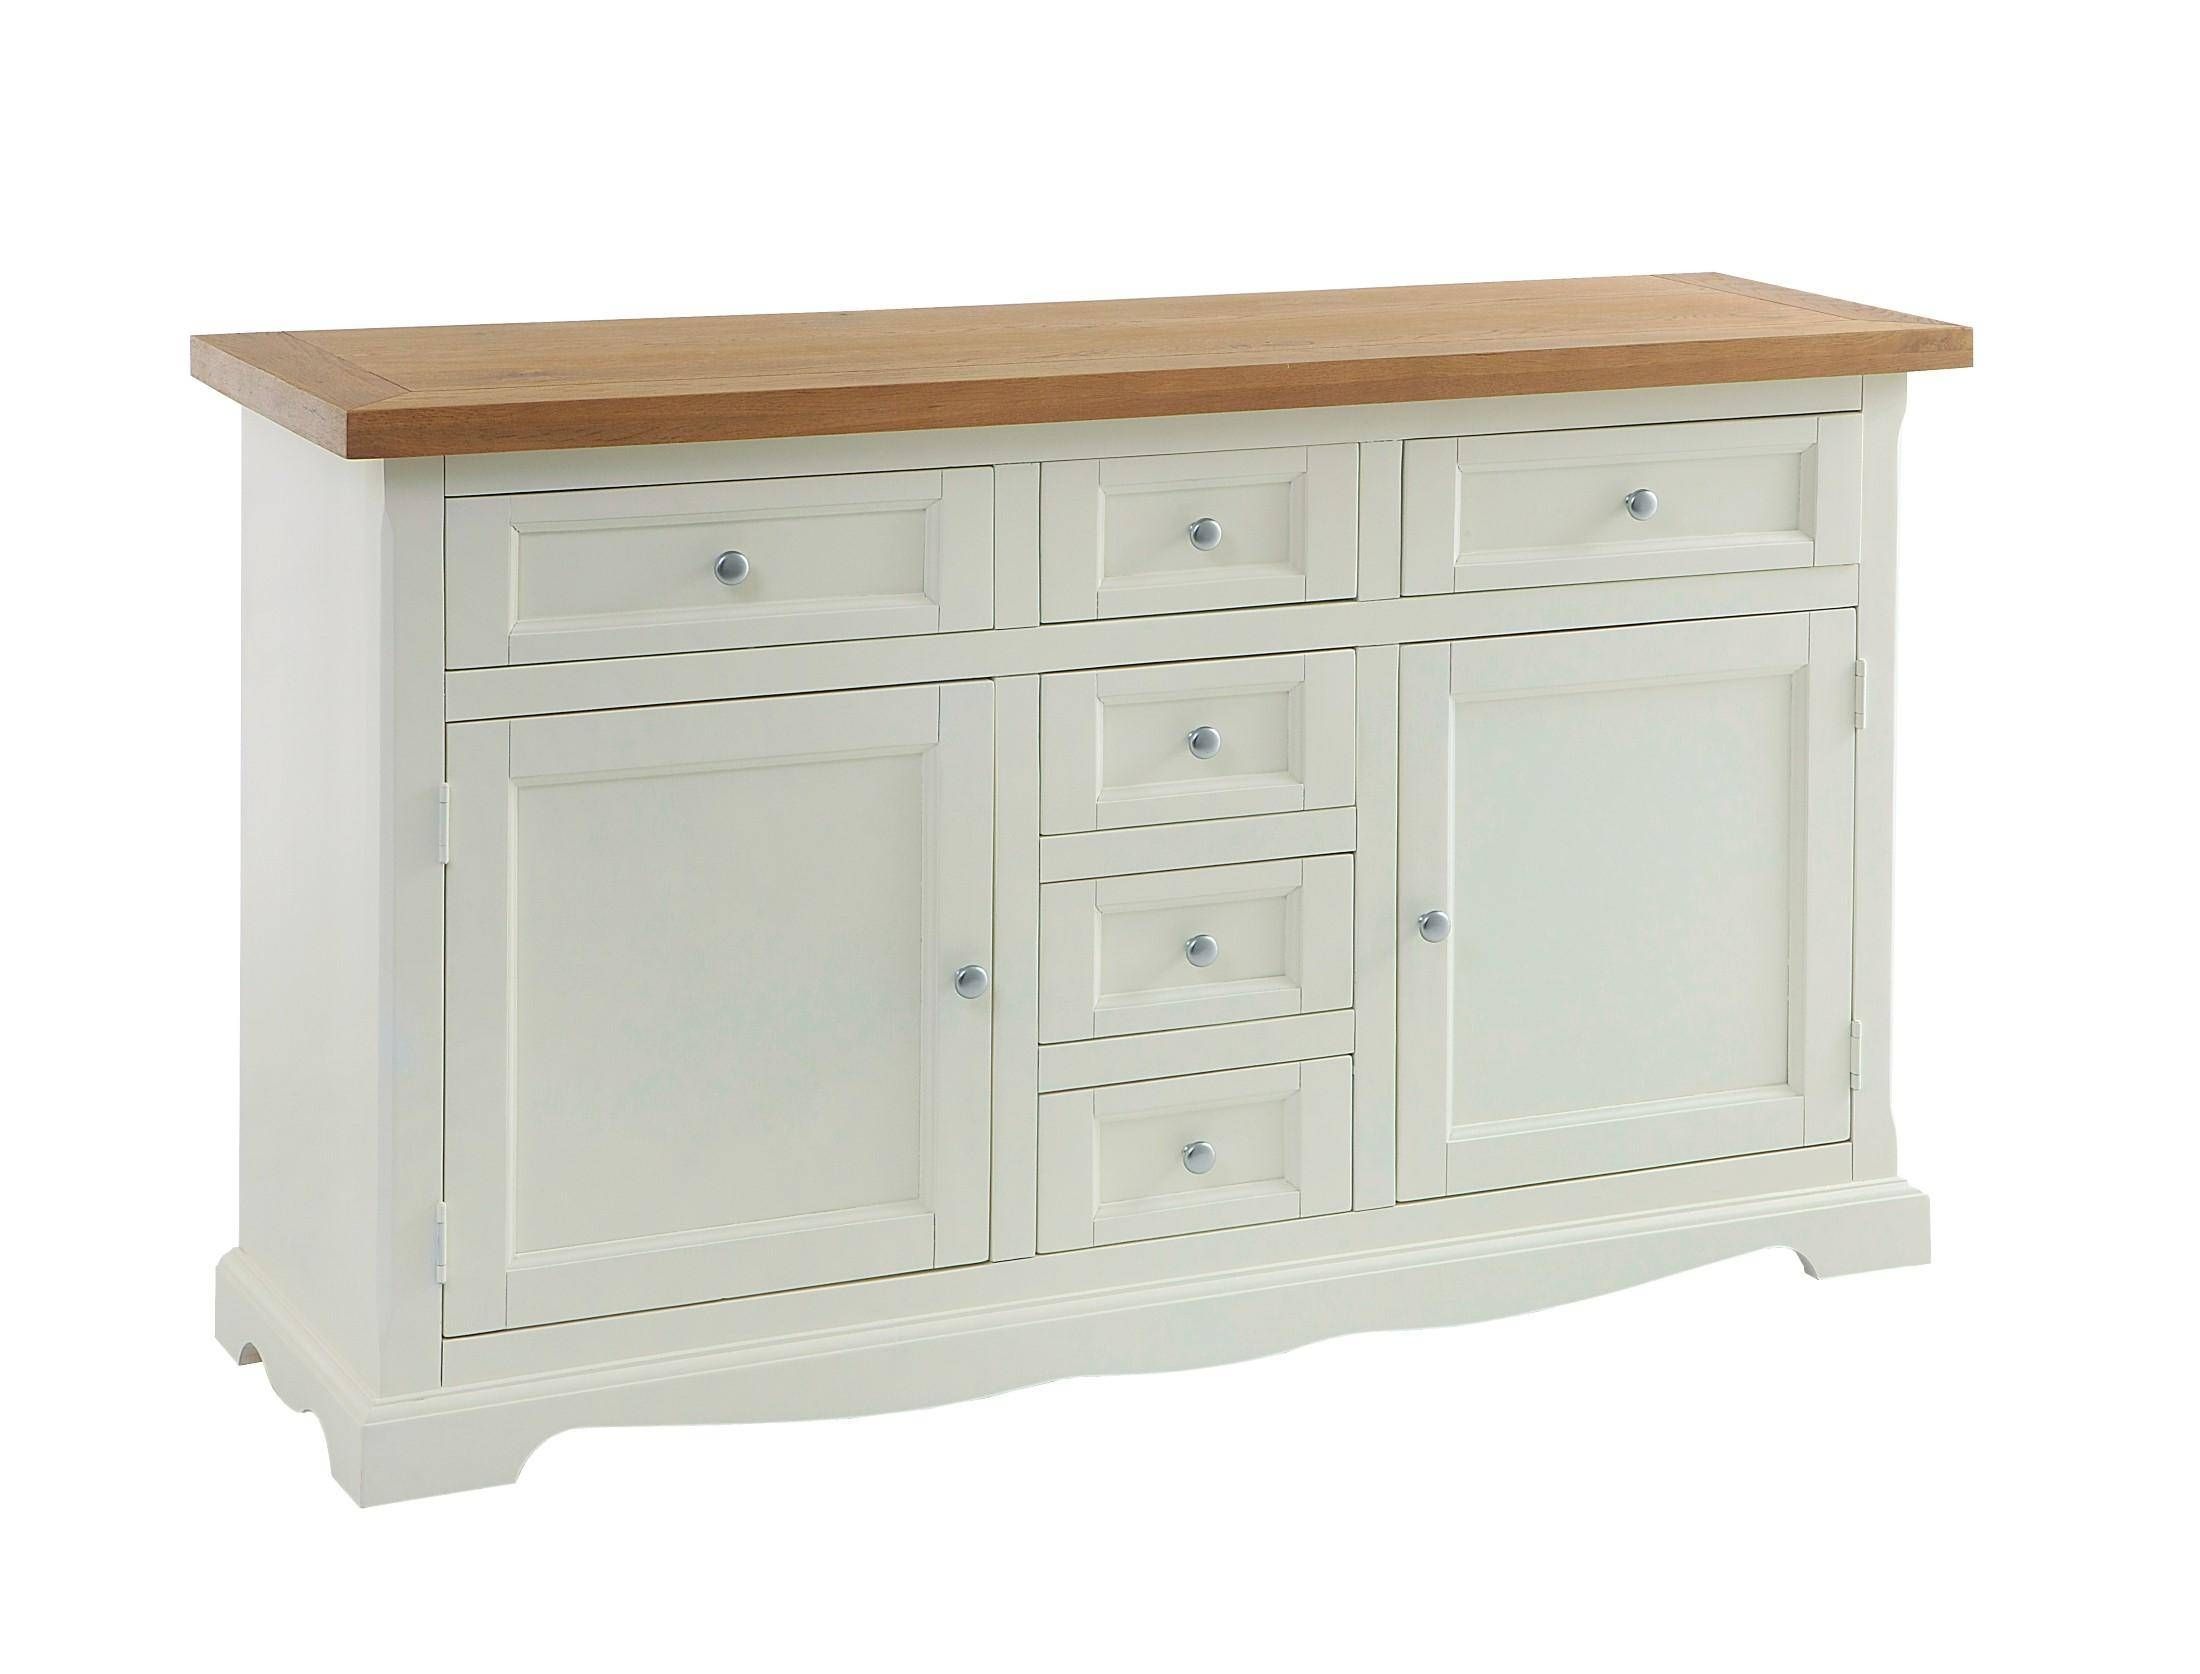 Large Irish Sideboard Cream – Flowerhill Furniture For Traditional Sideboards (View 23 of 30)